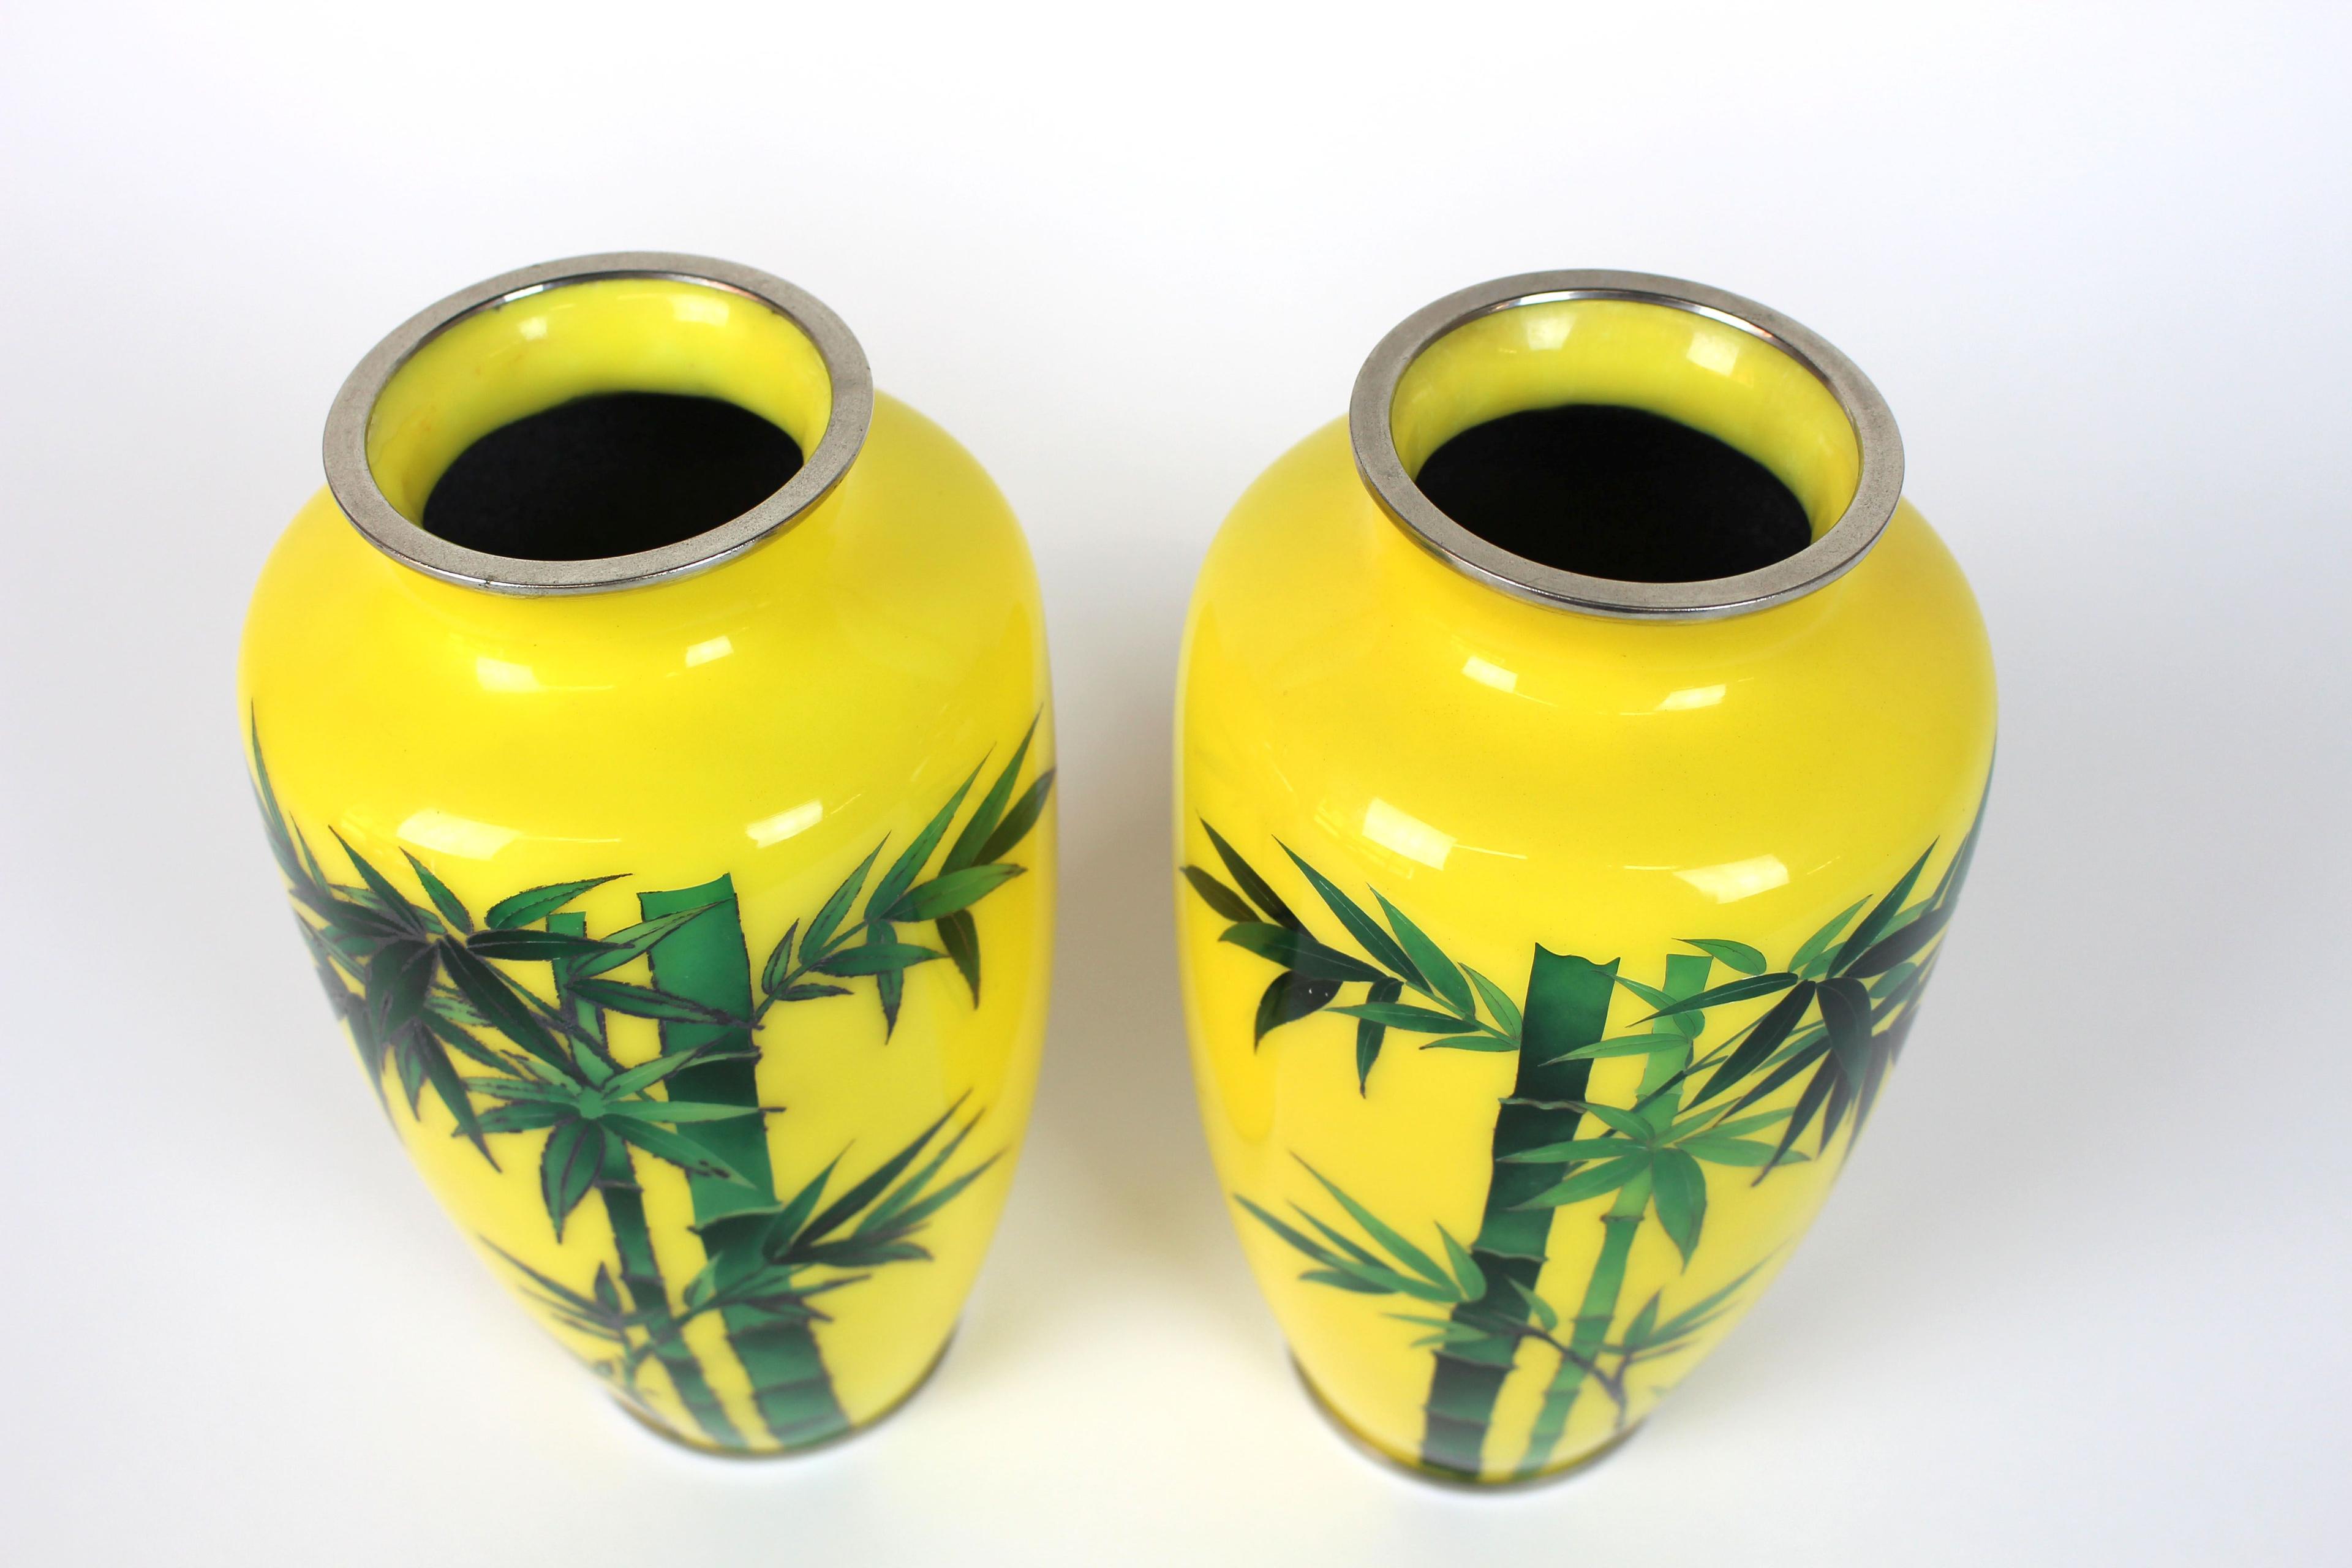 Pair of Vintage Asian Enamel Yellow Vases with Bamboo Design